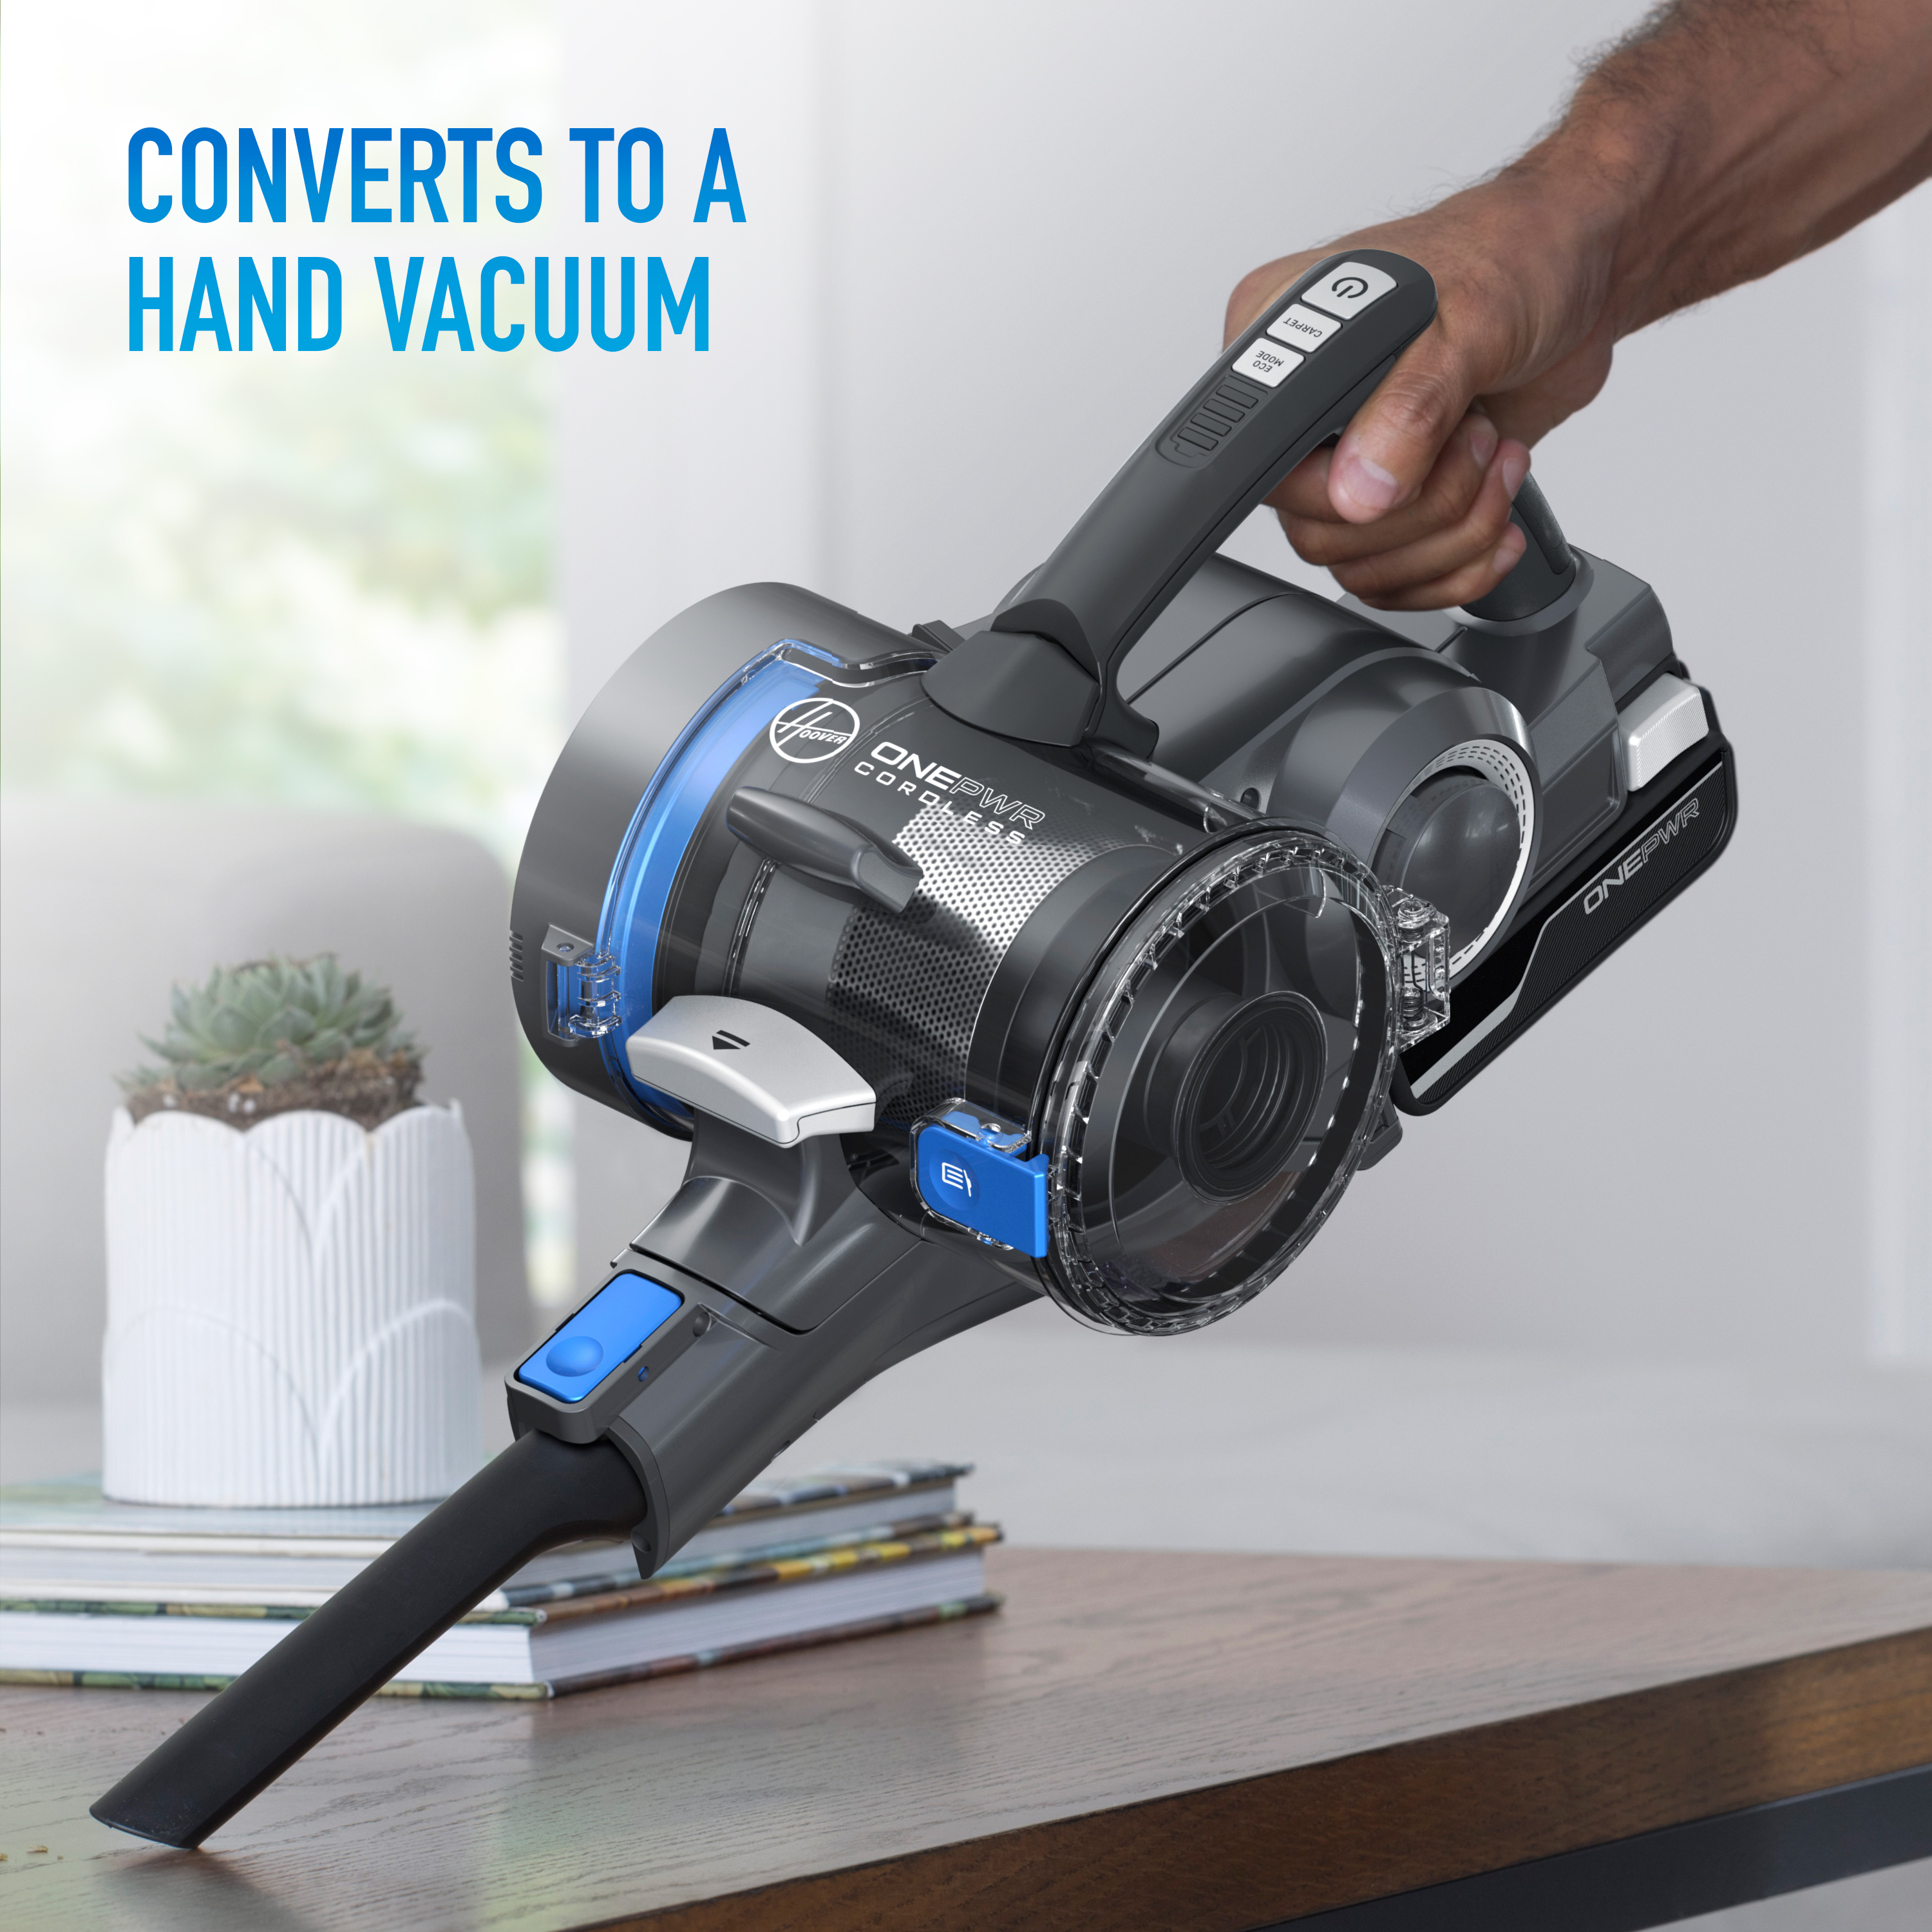 Hoover ONEPWR Blade+ Cordless Stick Vacuum Cleaner, BH53310 - image 6 of 15